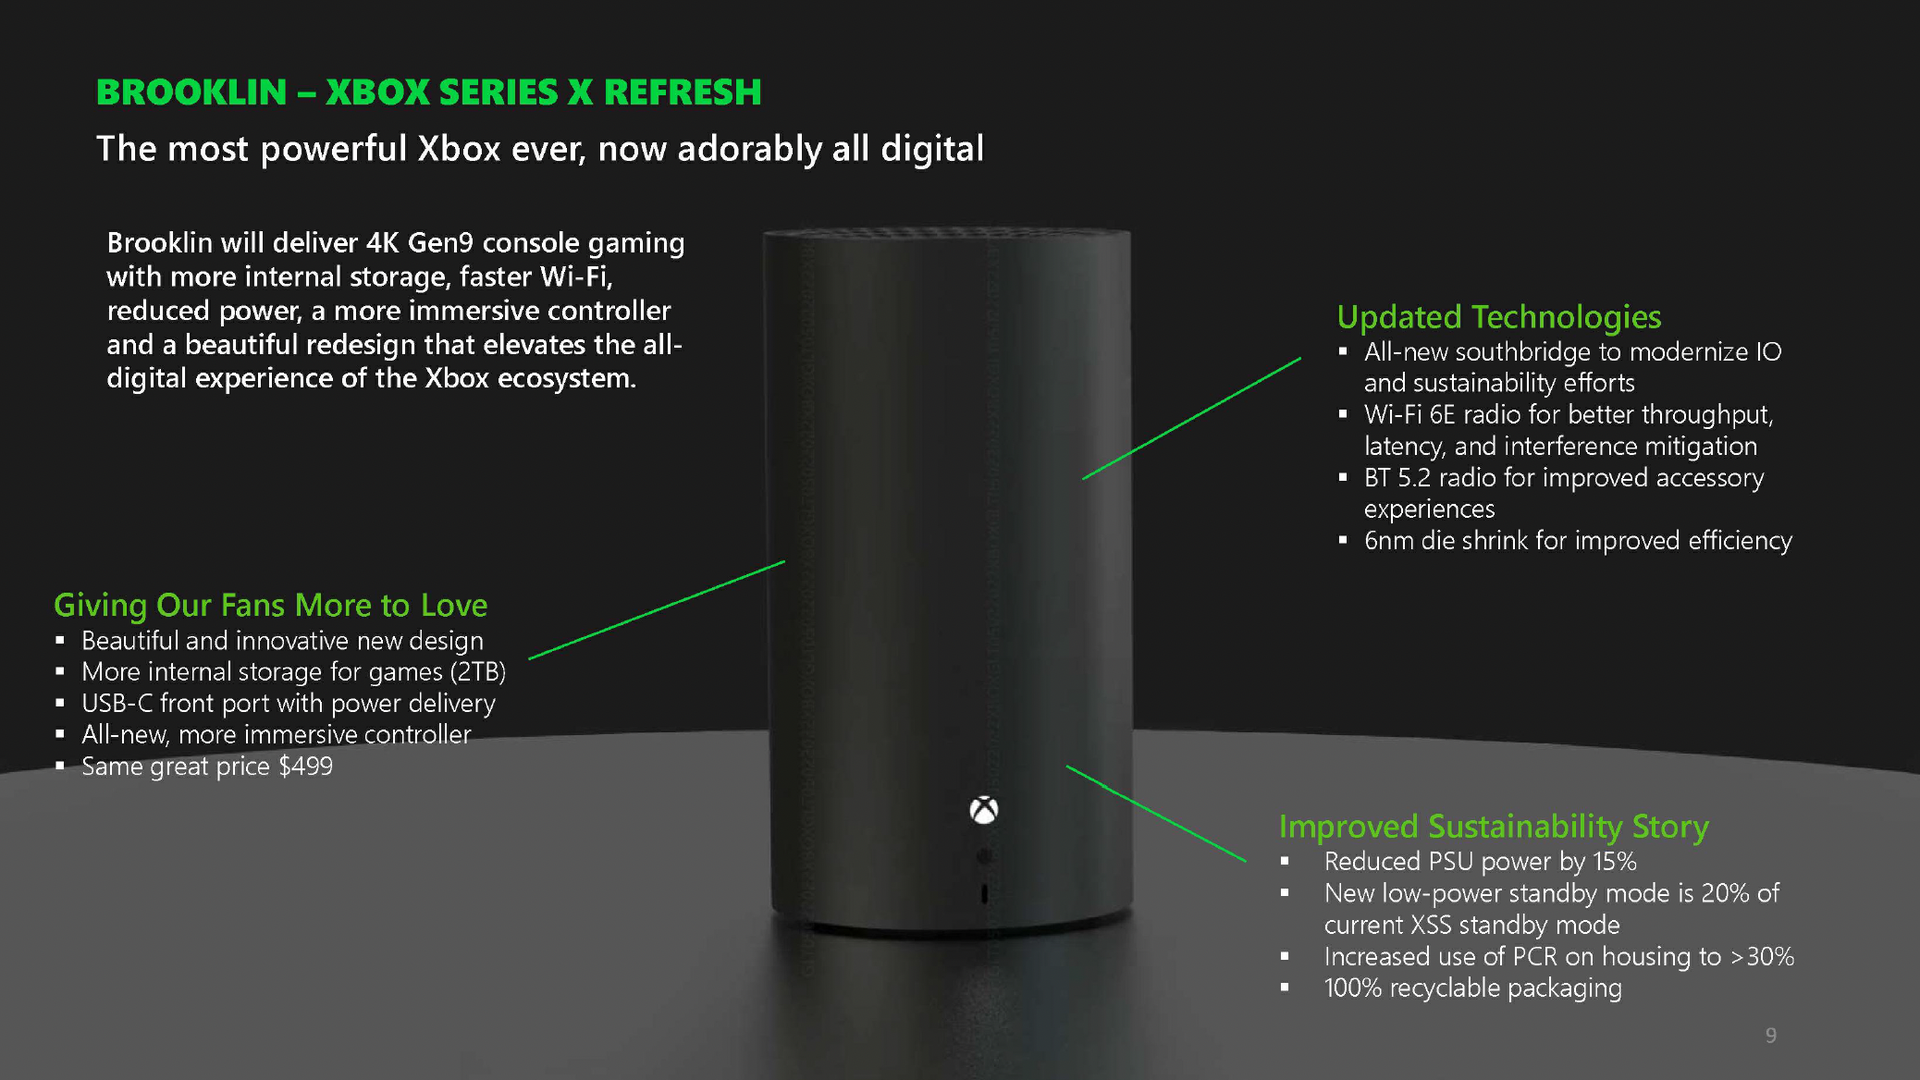 Image showing a cylindrical black Xbox Series X called Brooklin, with surrounding text explaining its features